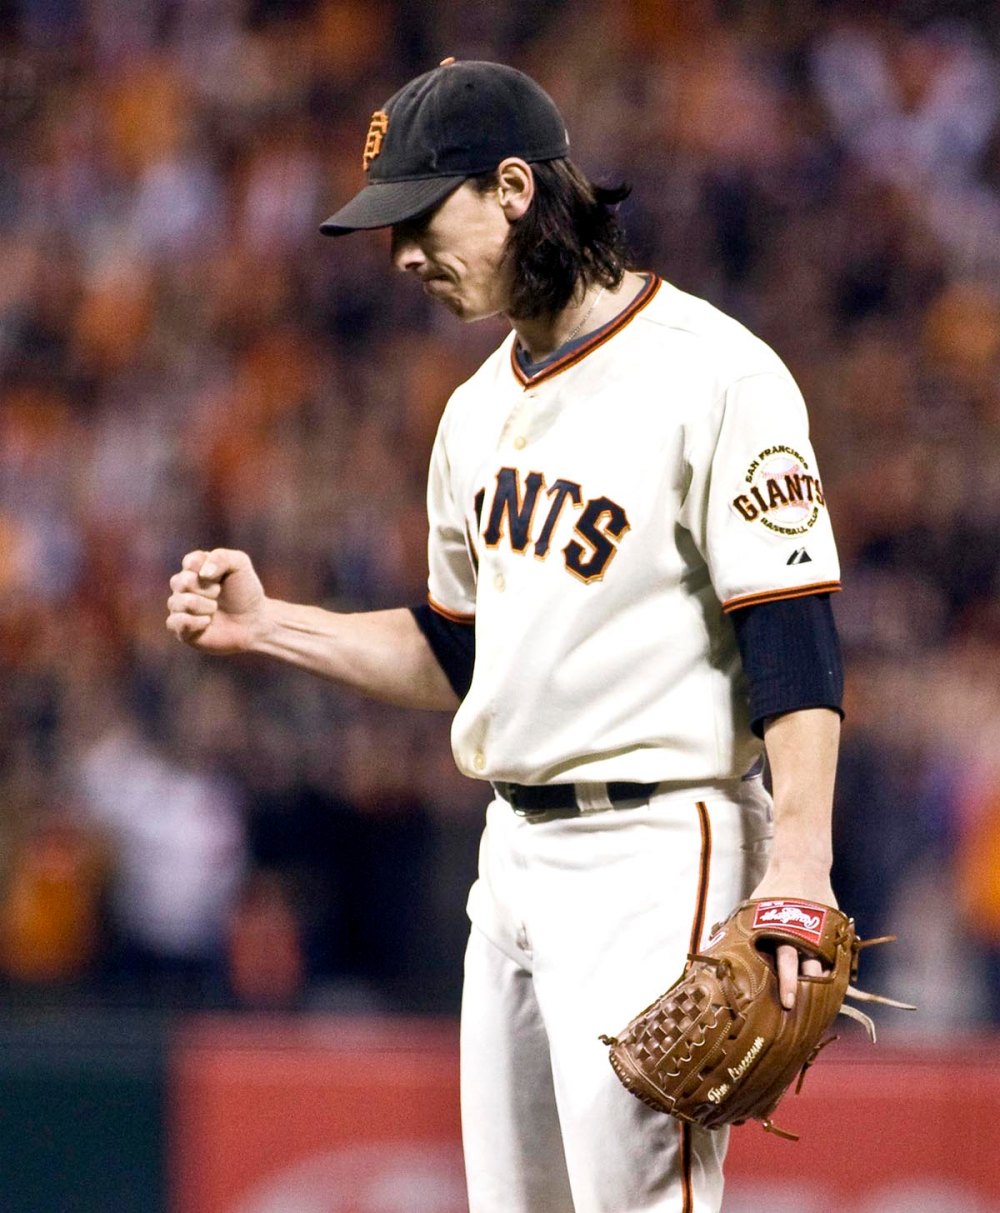 Giants announce death of former All-Star pitcher Tim Lincecum's wife